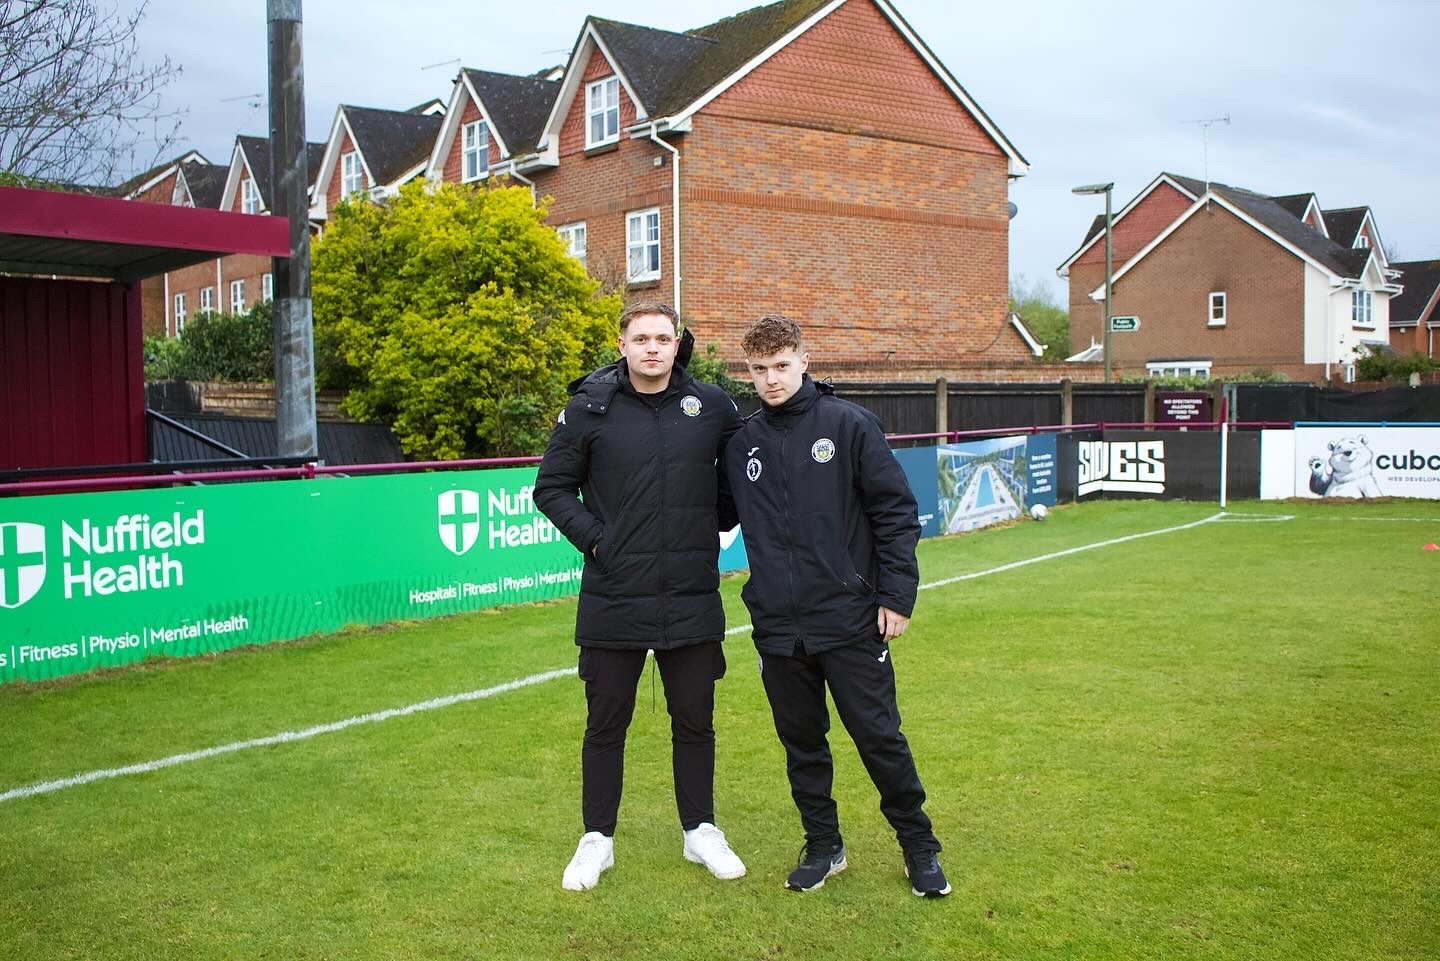 Brisk Agency CEO Liam Chick (left) with Tooting and Mitcham United FC social assistant Andrew Squibb (right) before the Farnham Town FC vs Tooting & Mitcham FC match